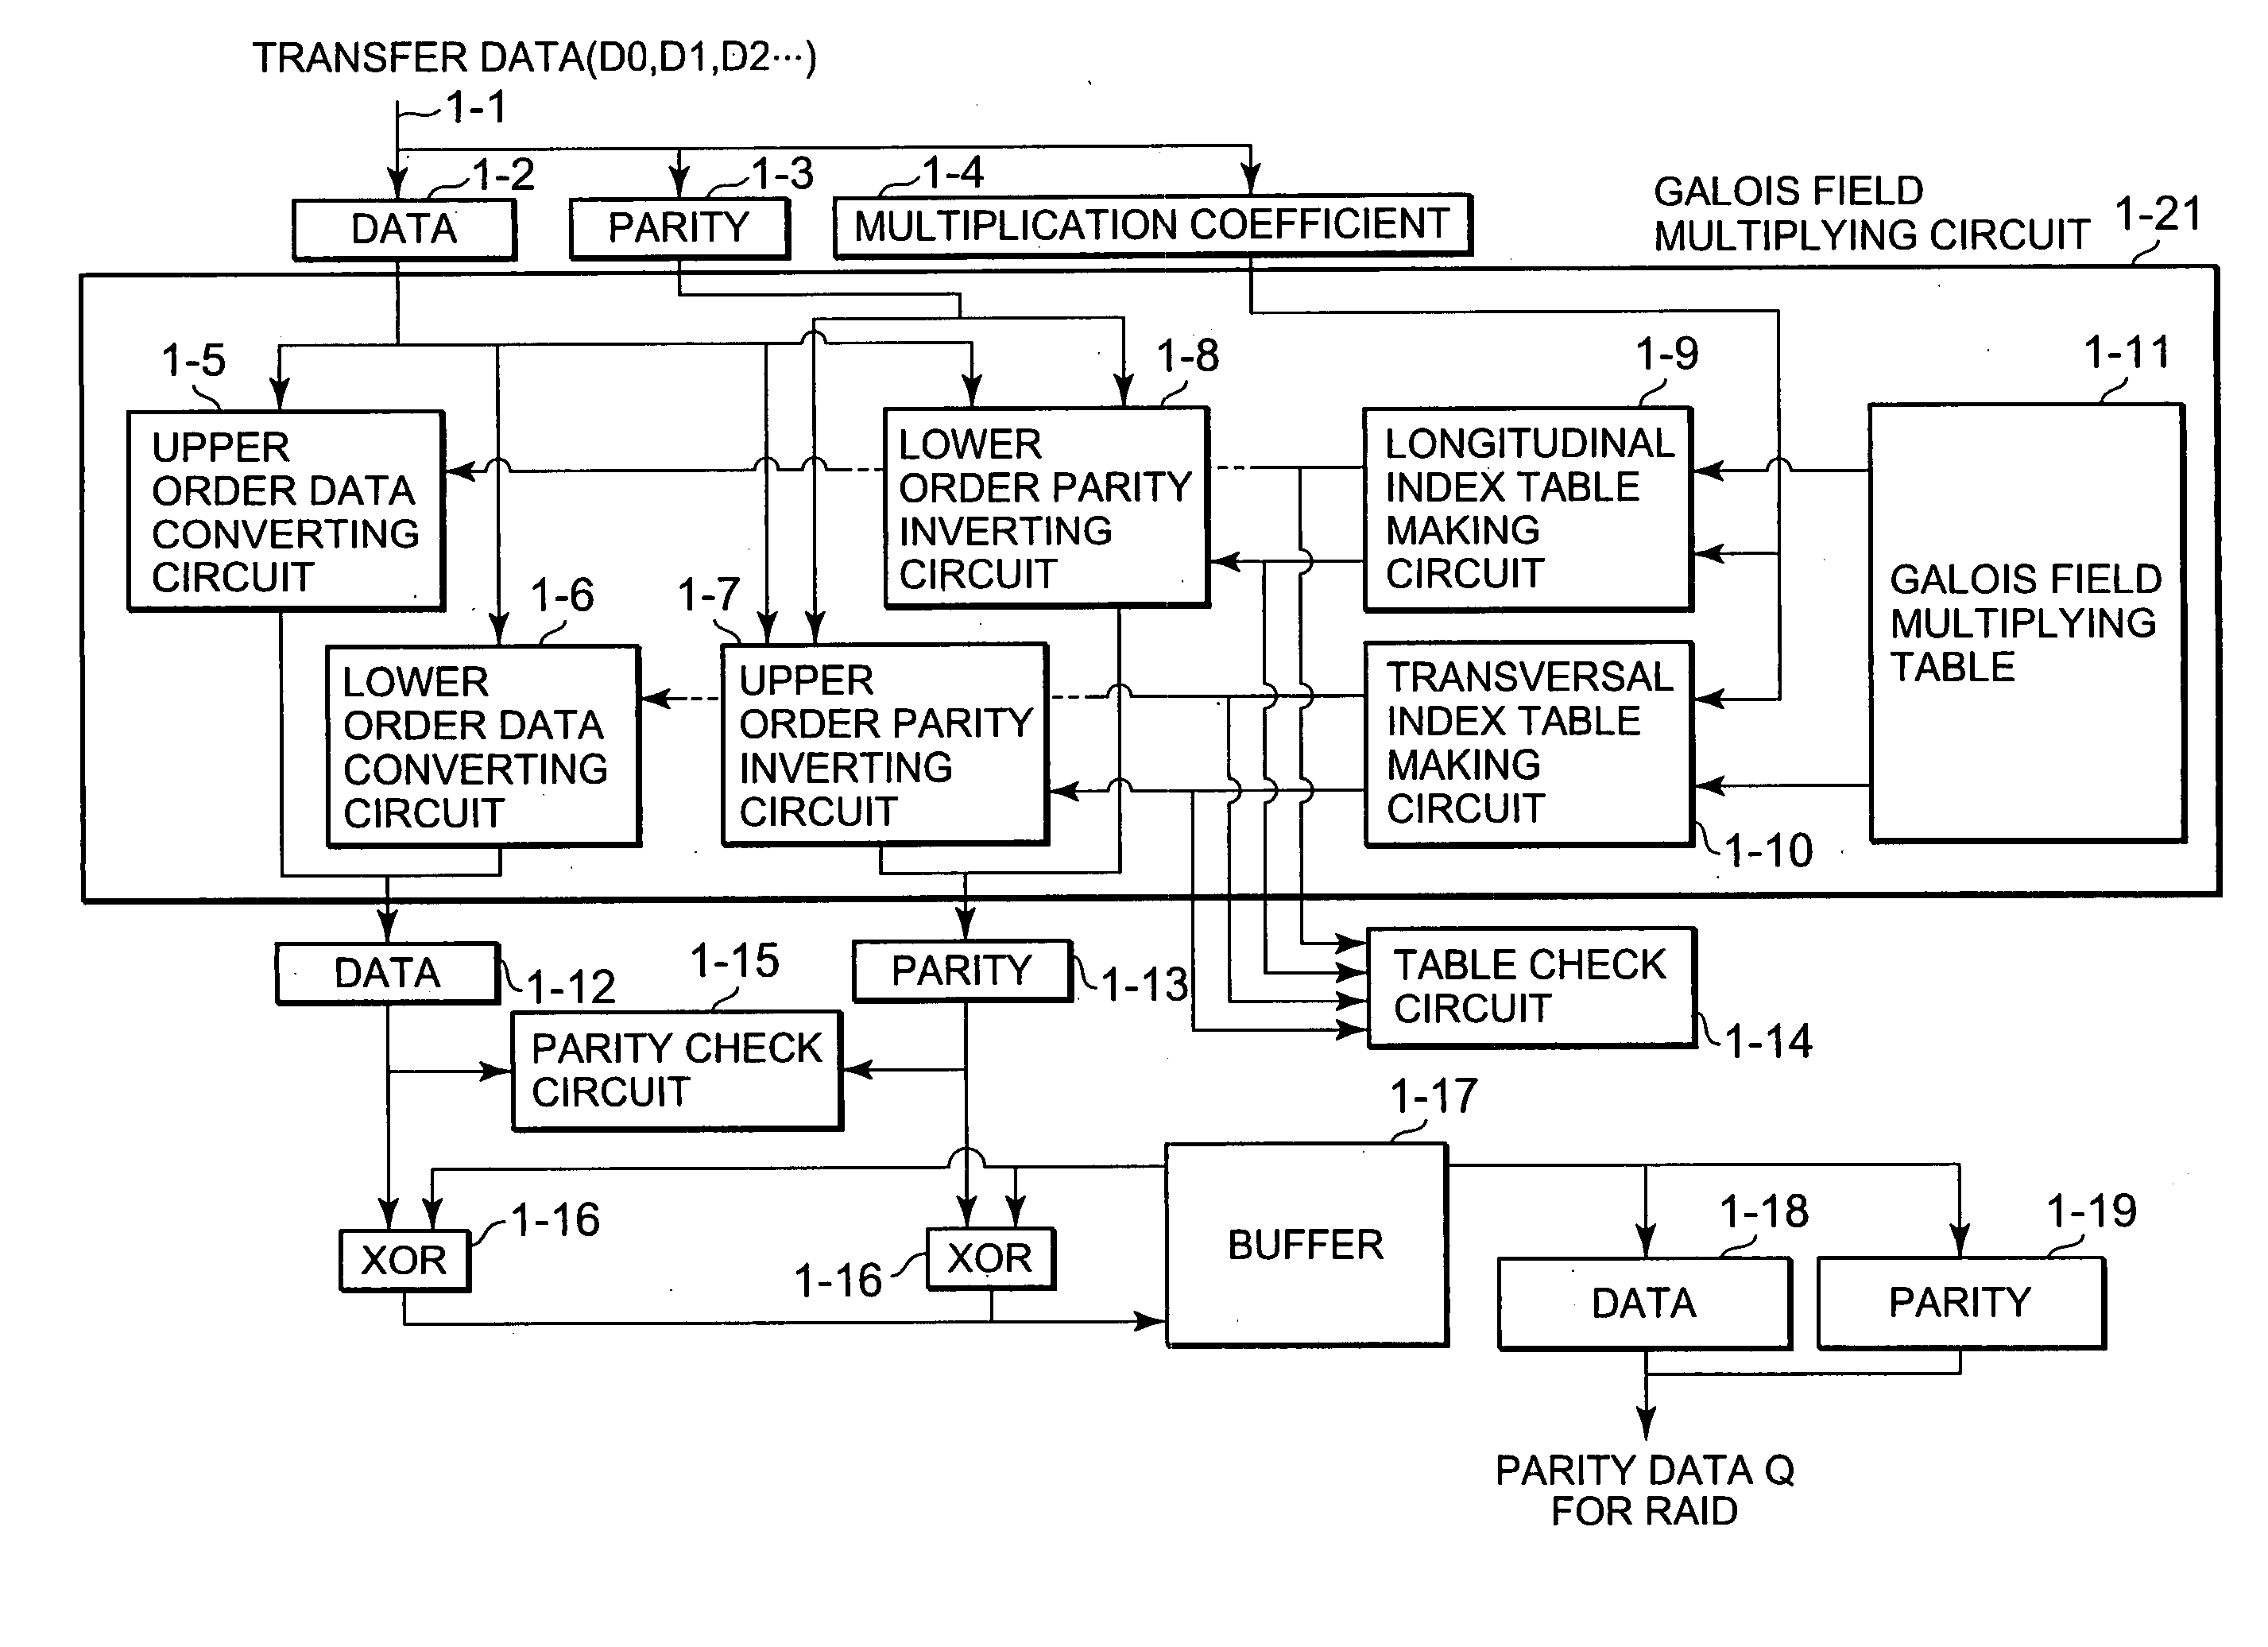 Disk array device, parity data generating circuit for raid and galois field multiplying circuit